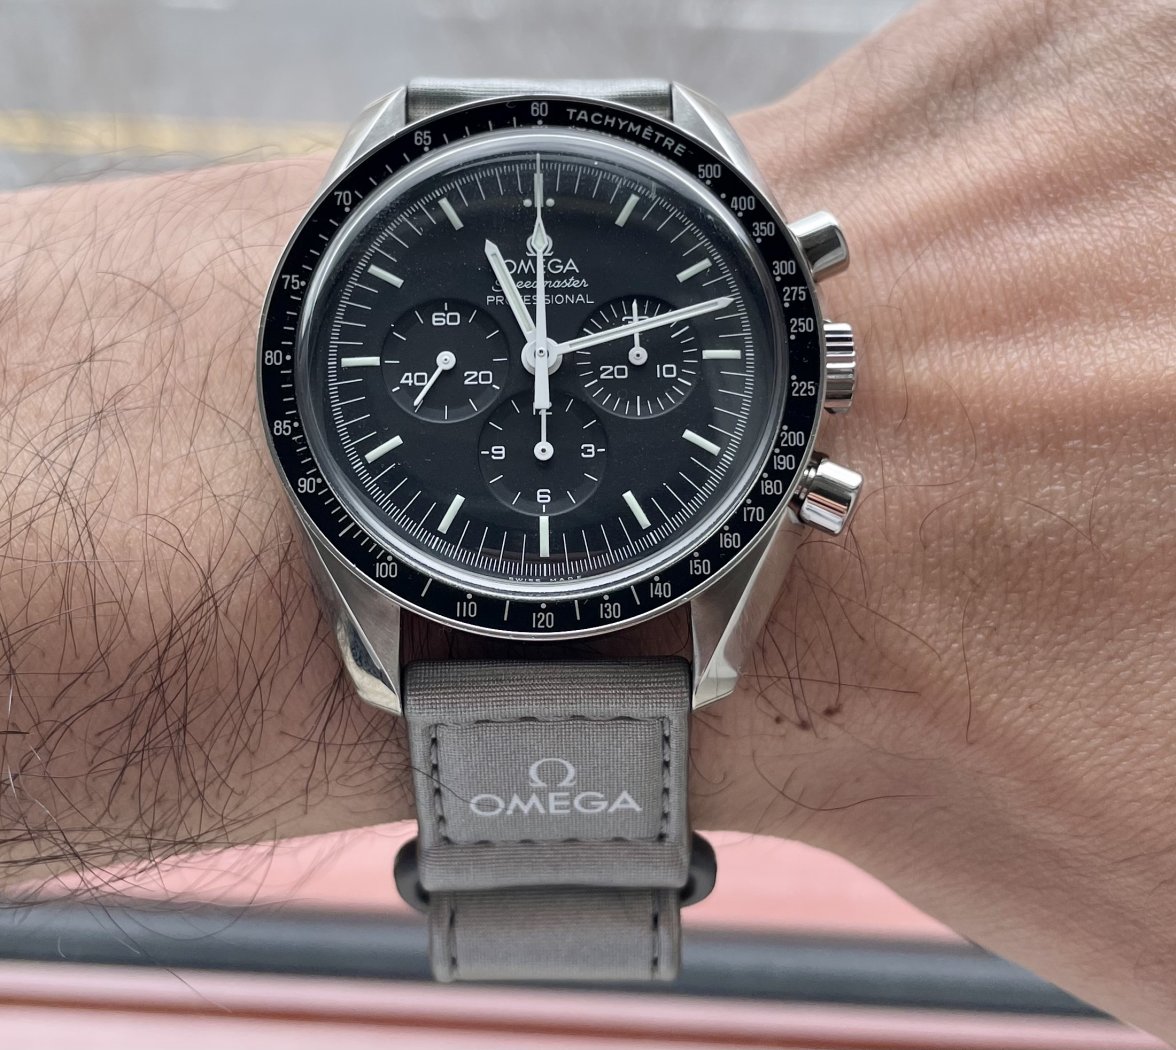 Omega x Swatch - MoonSwatch Only - Pictures Thread! | Page 7 | Omega Forums